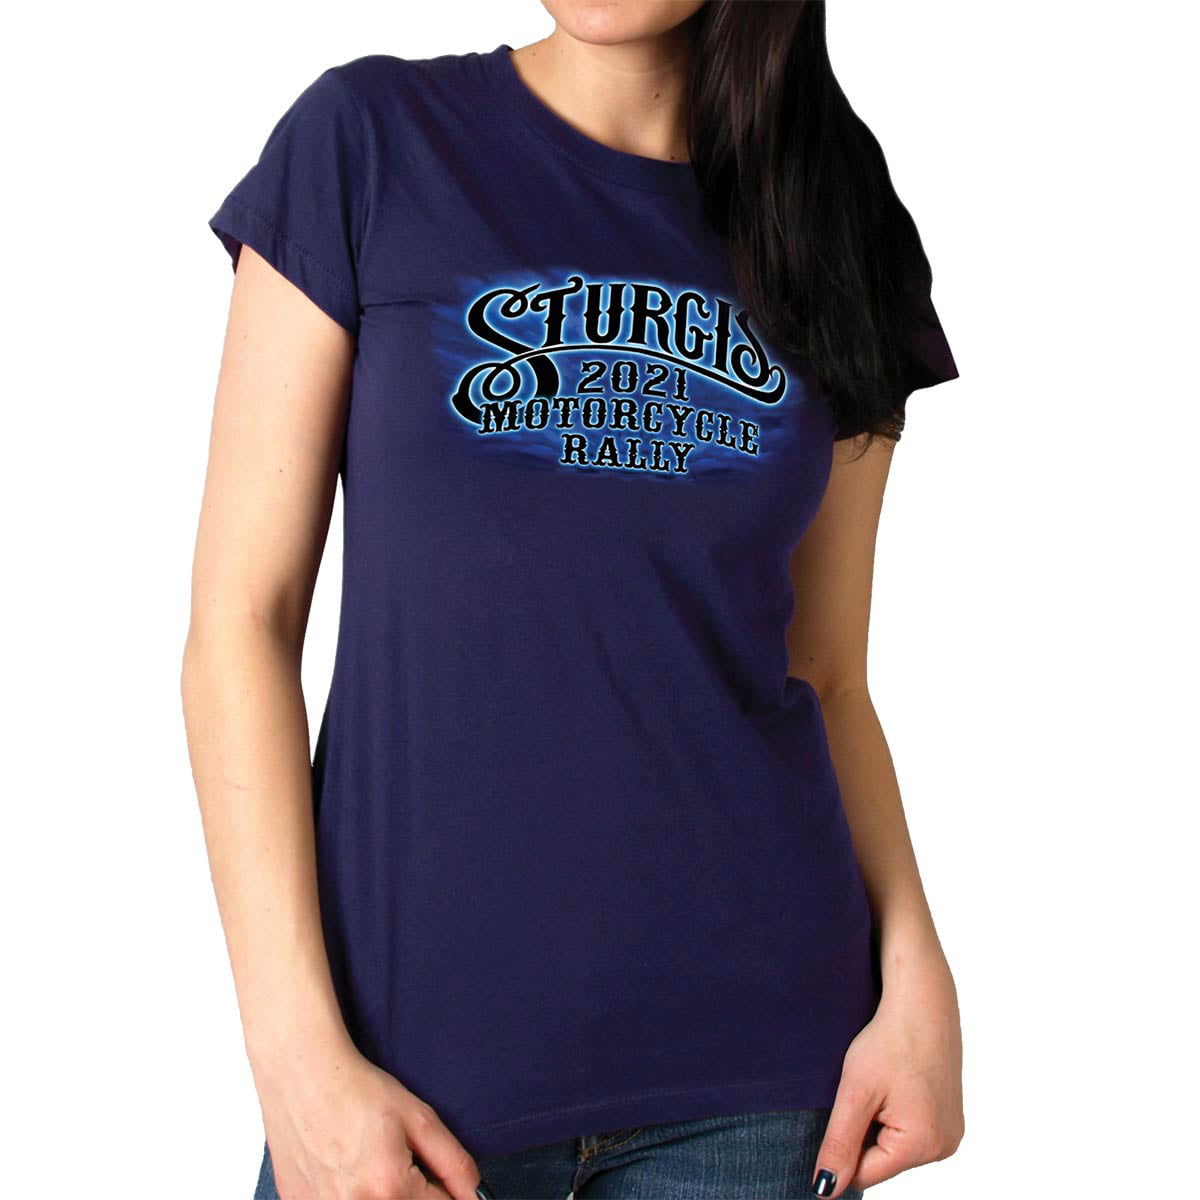 NAVY Small Official 2019 Sturgis Motorcycle Rally Ladies Bear Beauty Navy T-Shirt 